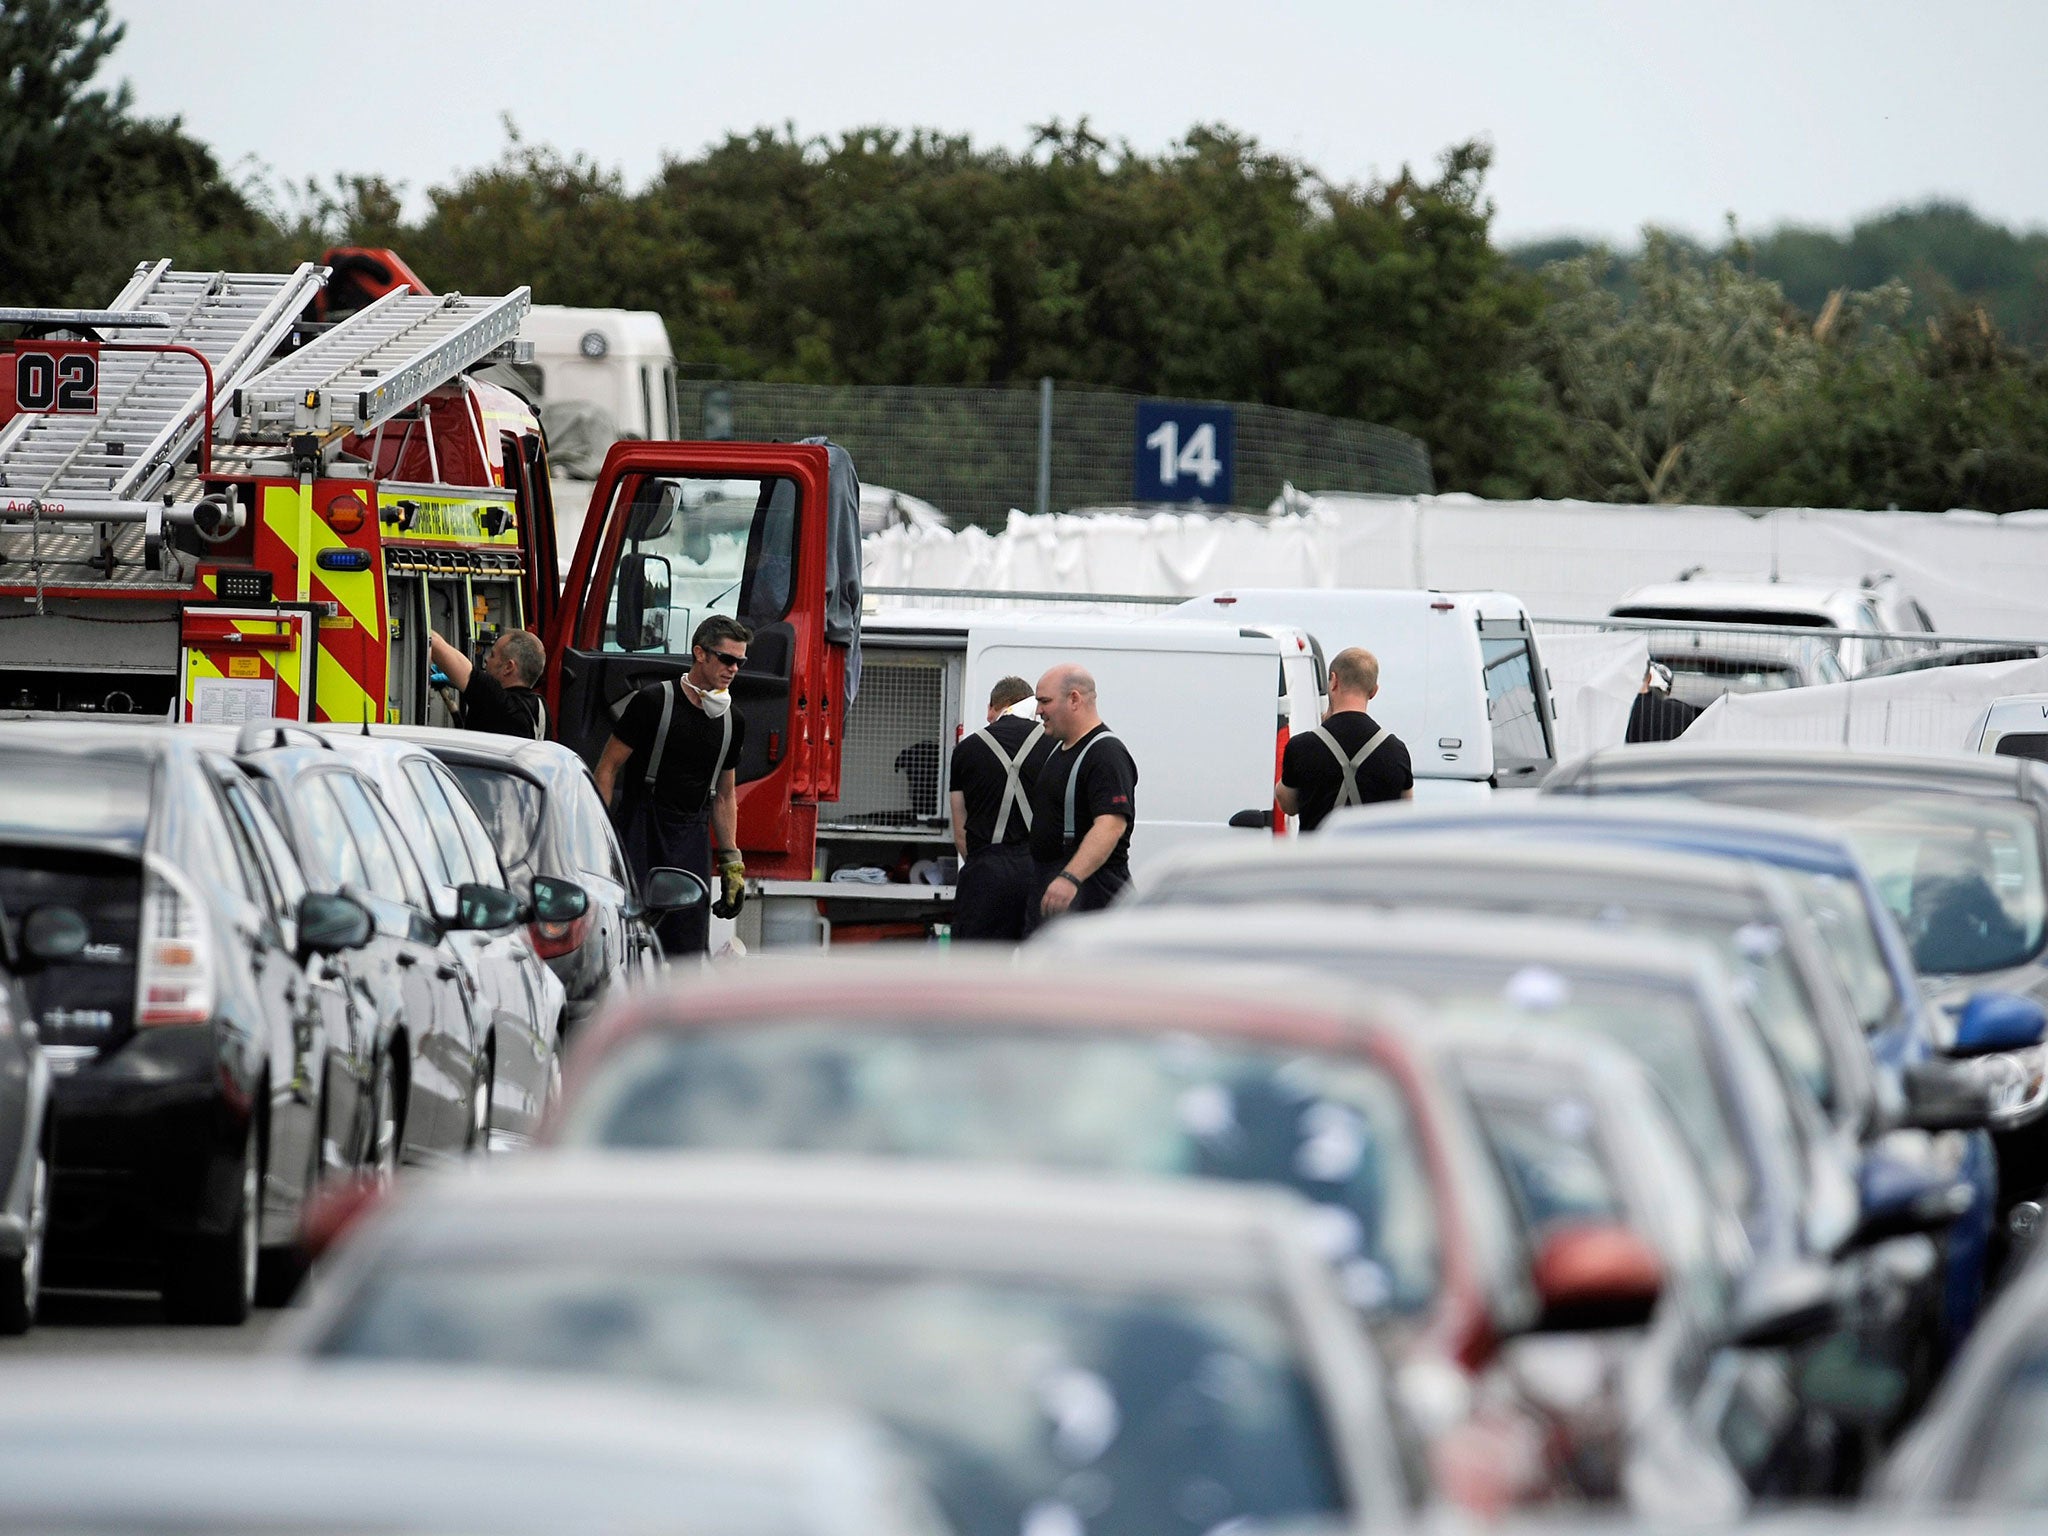 Hampshire police and firefighters at the scene of the Embraer Phenom 300 jet crash site at the British Car Auctions, Blackbushe, Hampshire